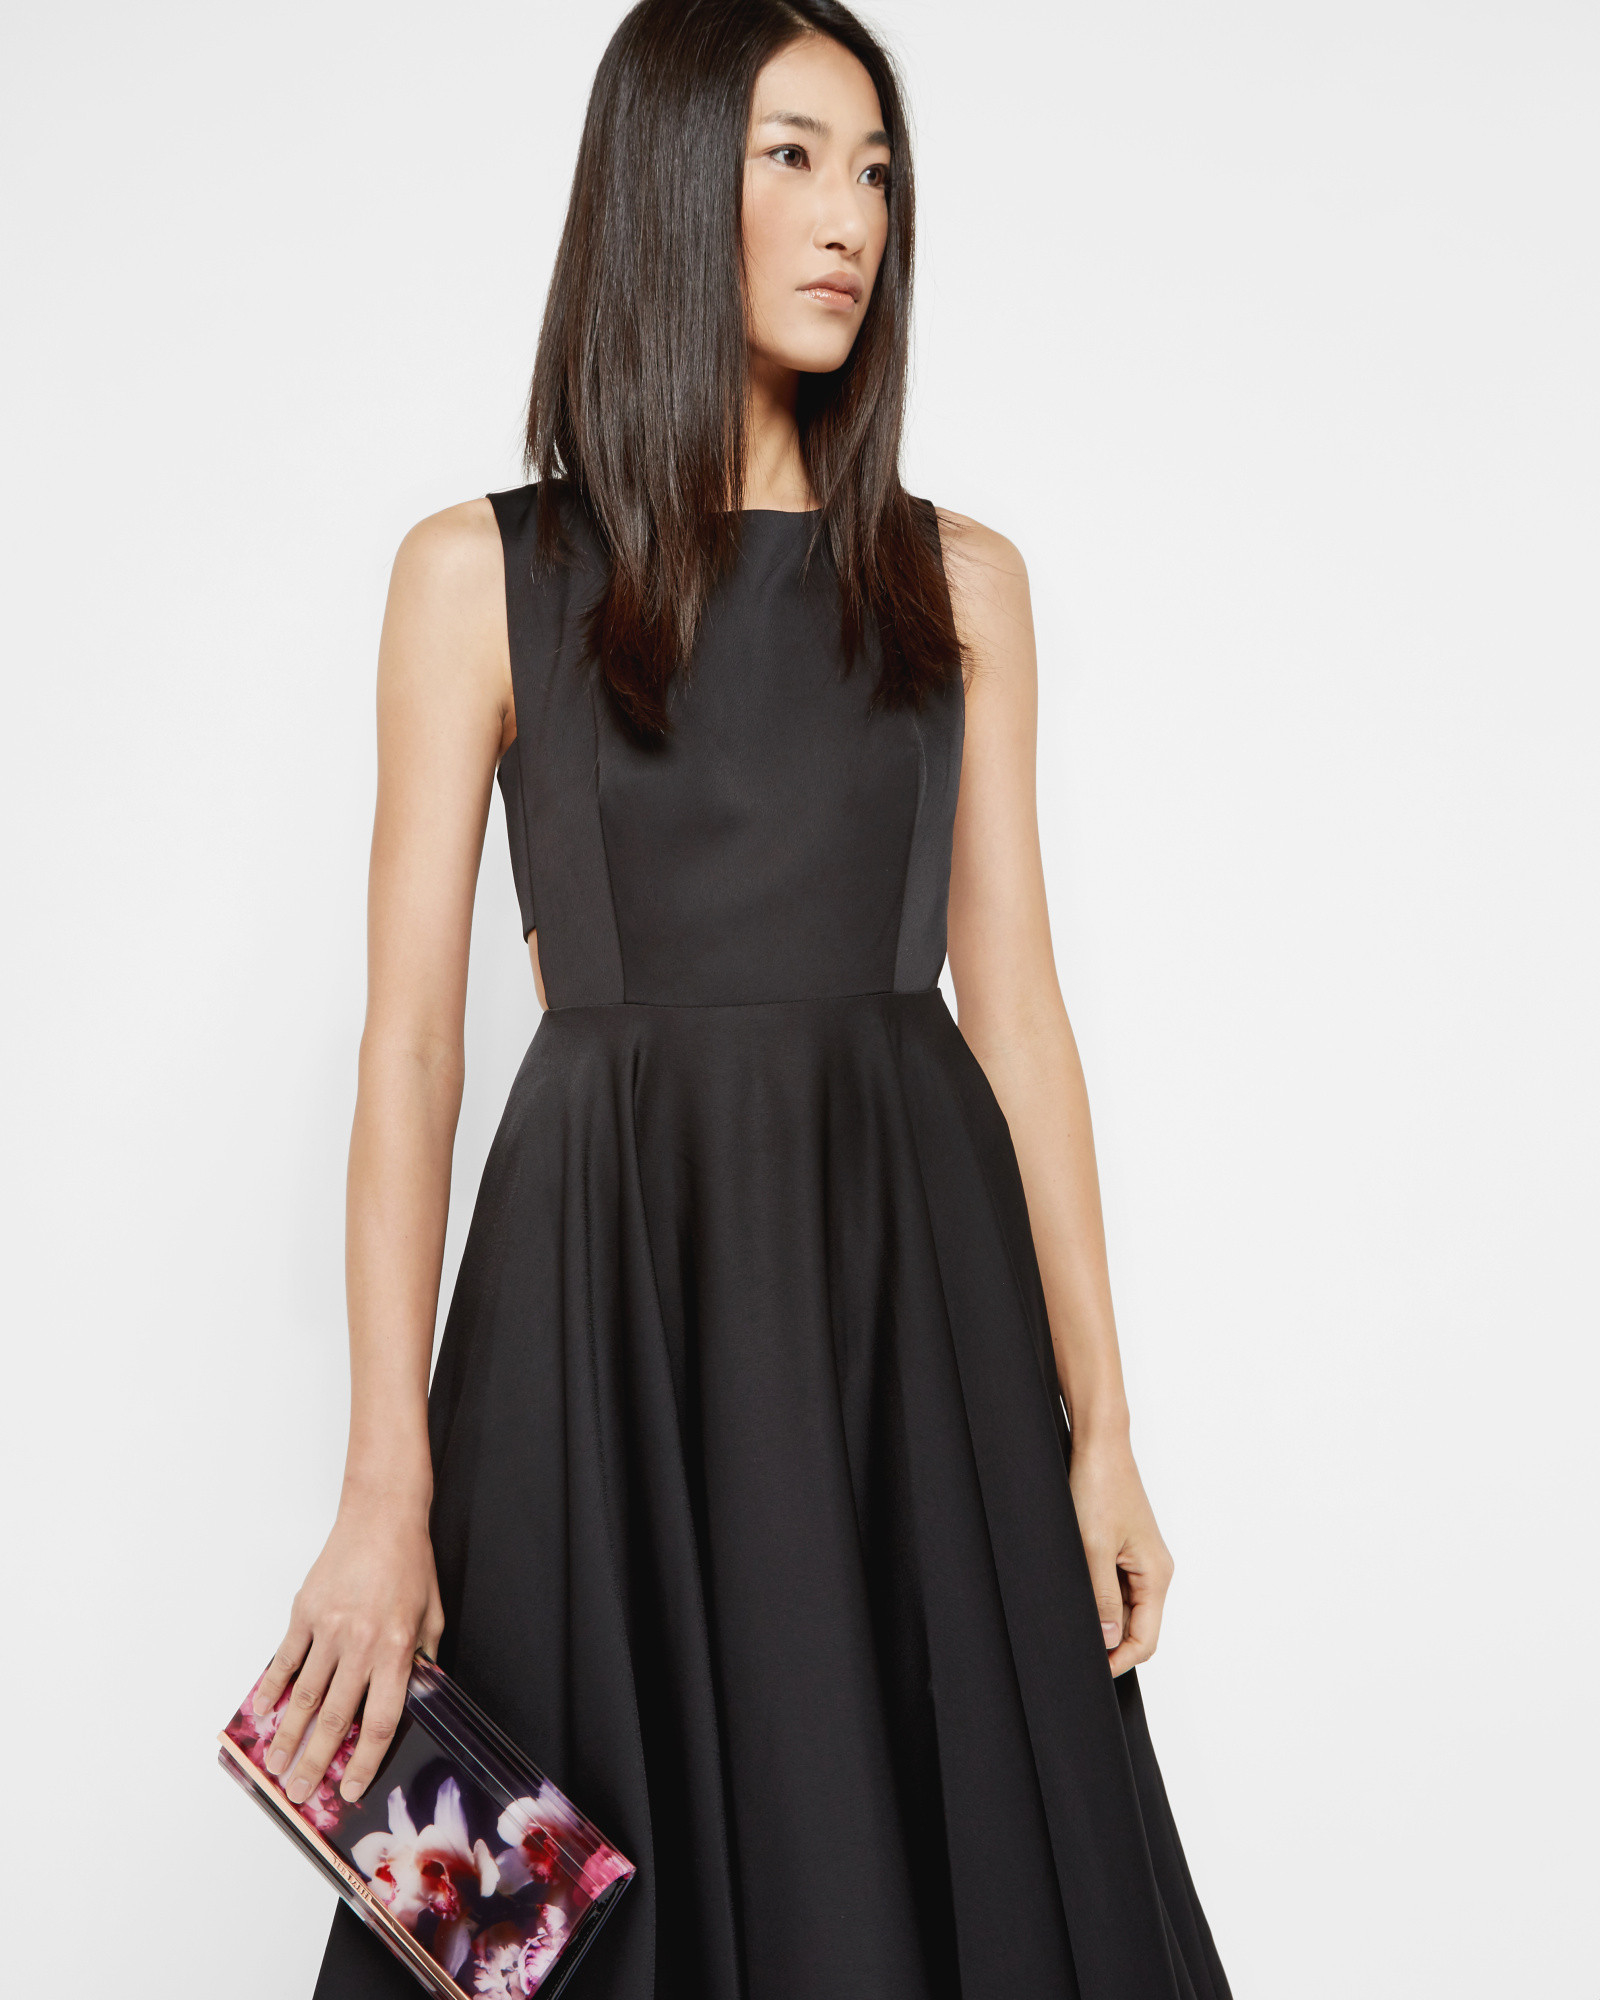 Lyst - Ted Baker Cut-out Midi Dress in Black